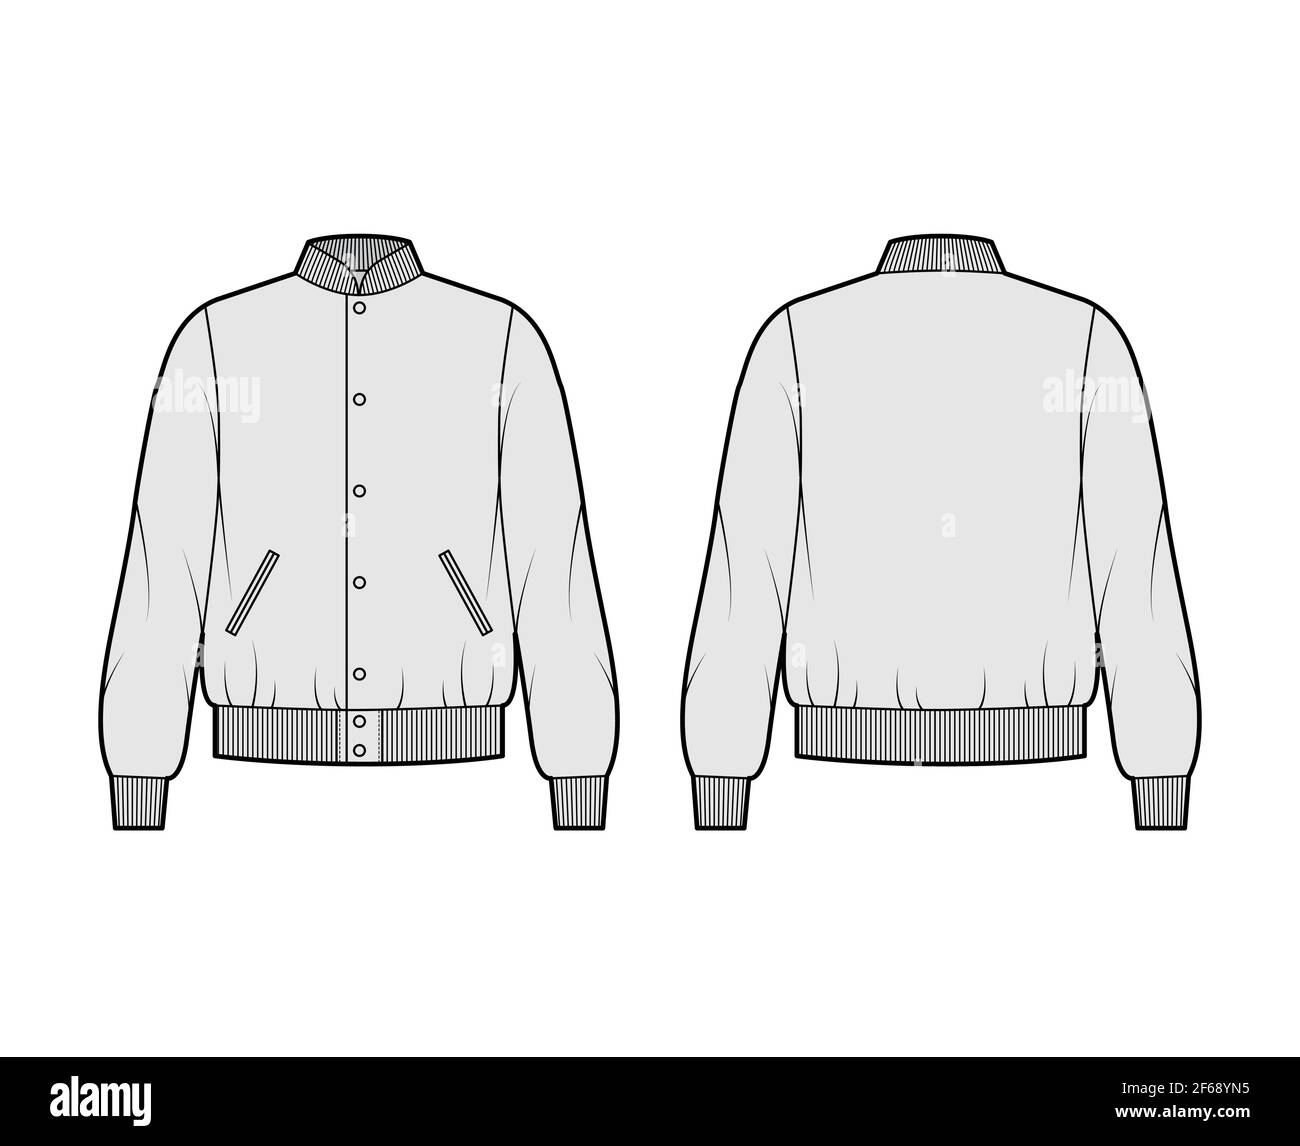 Varsity Bomber jacket technical fashion illustration with Rib baseball collar, pockets, buttons fastening, oversized, long sleeves. Flat coat template front, back, grey color. Women men unisex top CAD Stock Vector